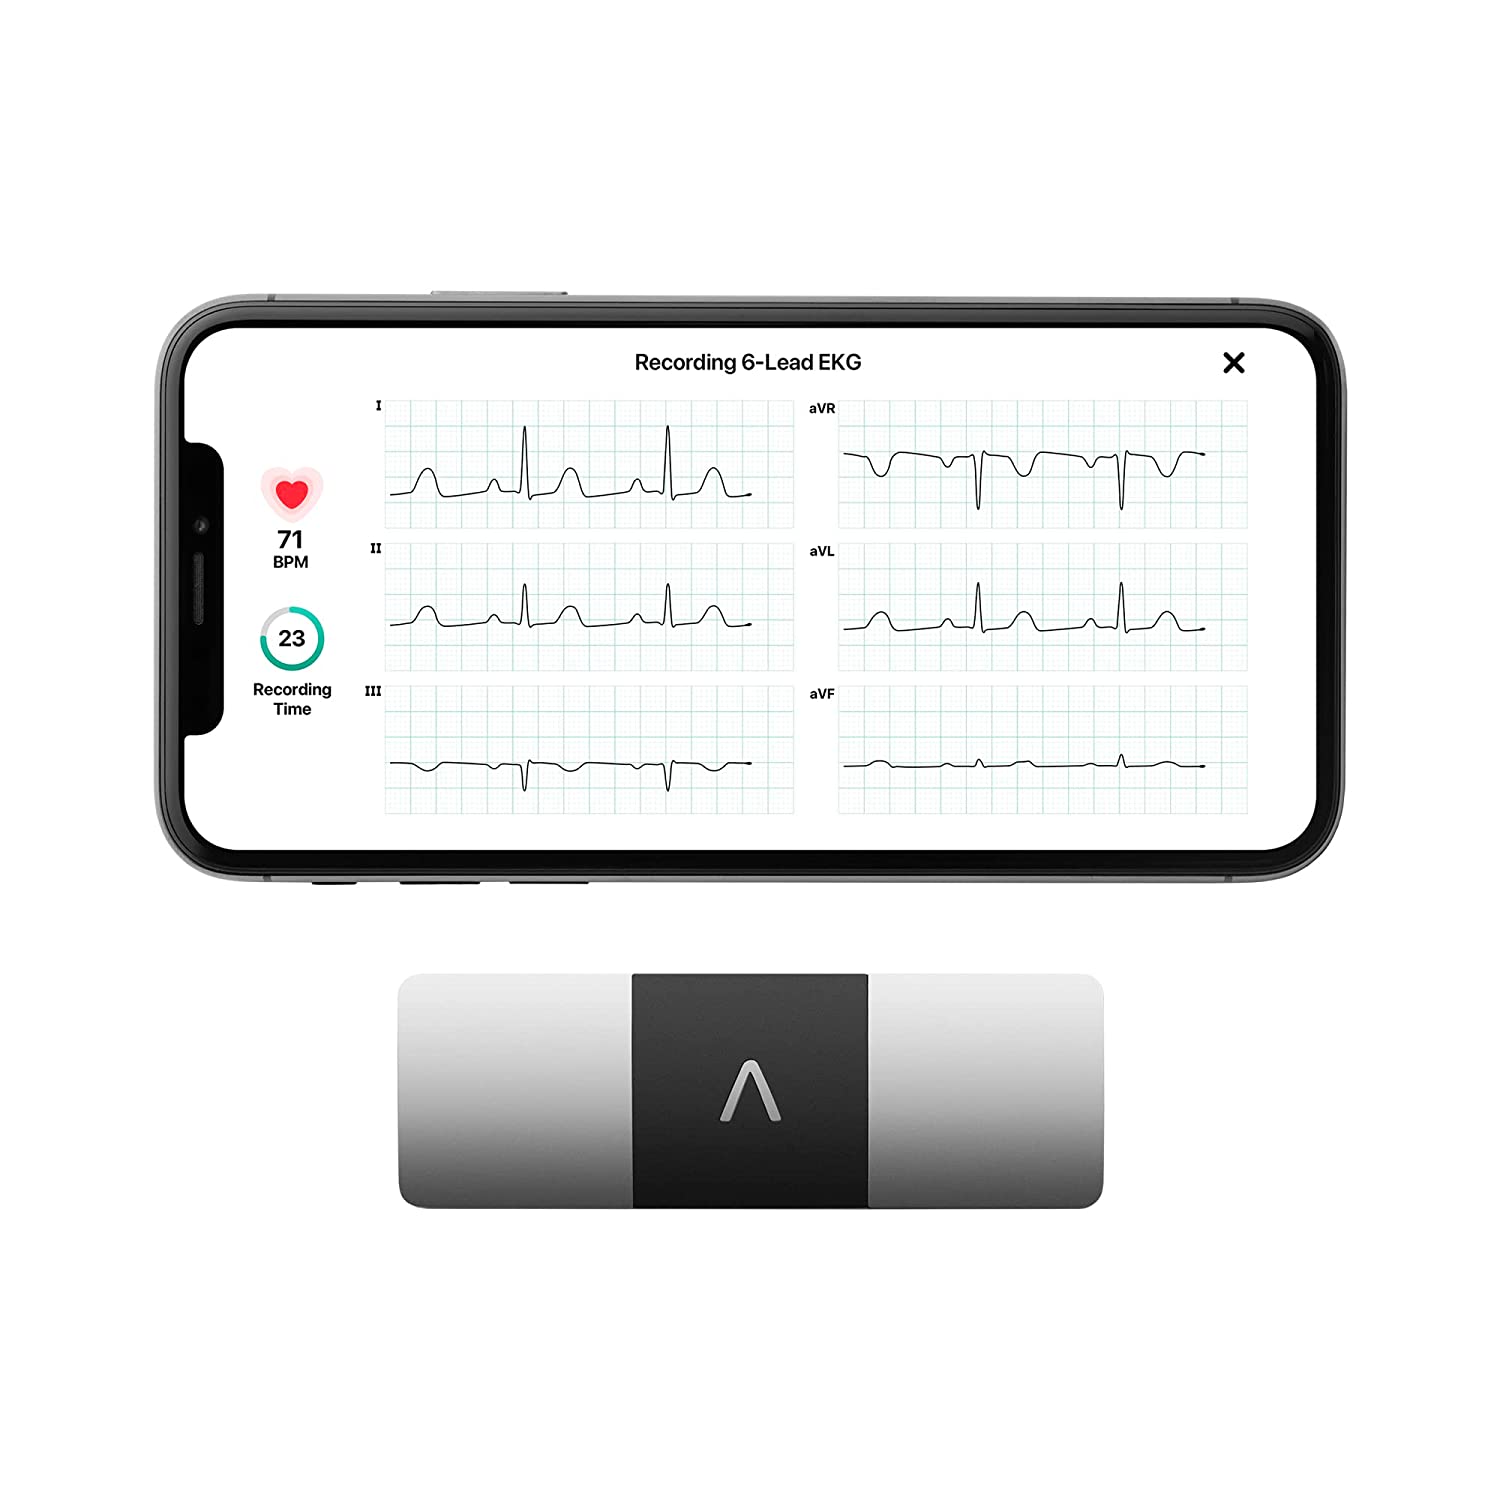 KardiaMobile Six-Lead Portable ECG Device - Fast & Accurate 6 Lead ECG Machine | US FDA Cleared & Clinically Validated Device | Record ECG at Home Safely